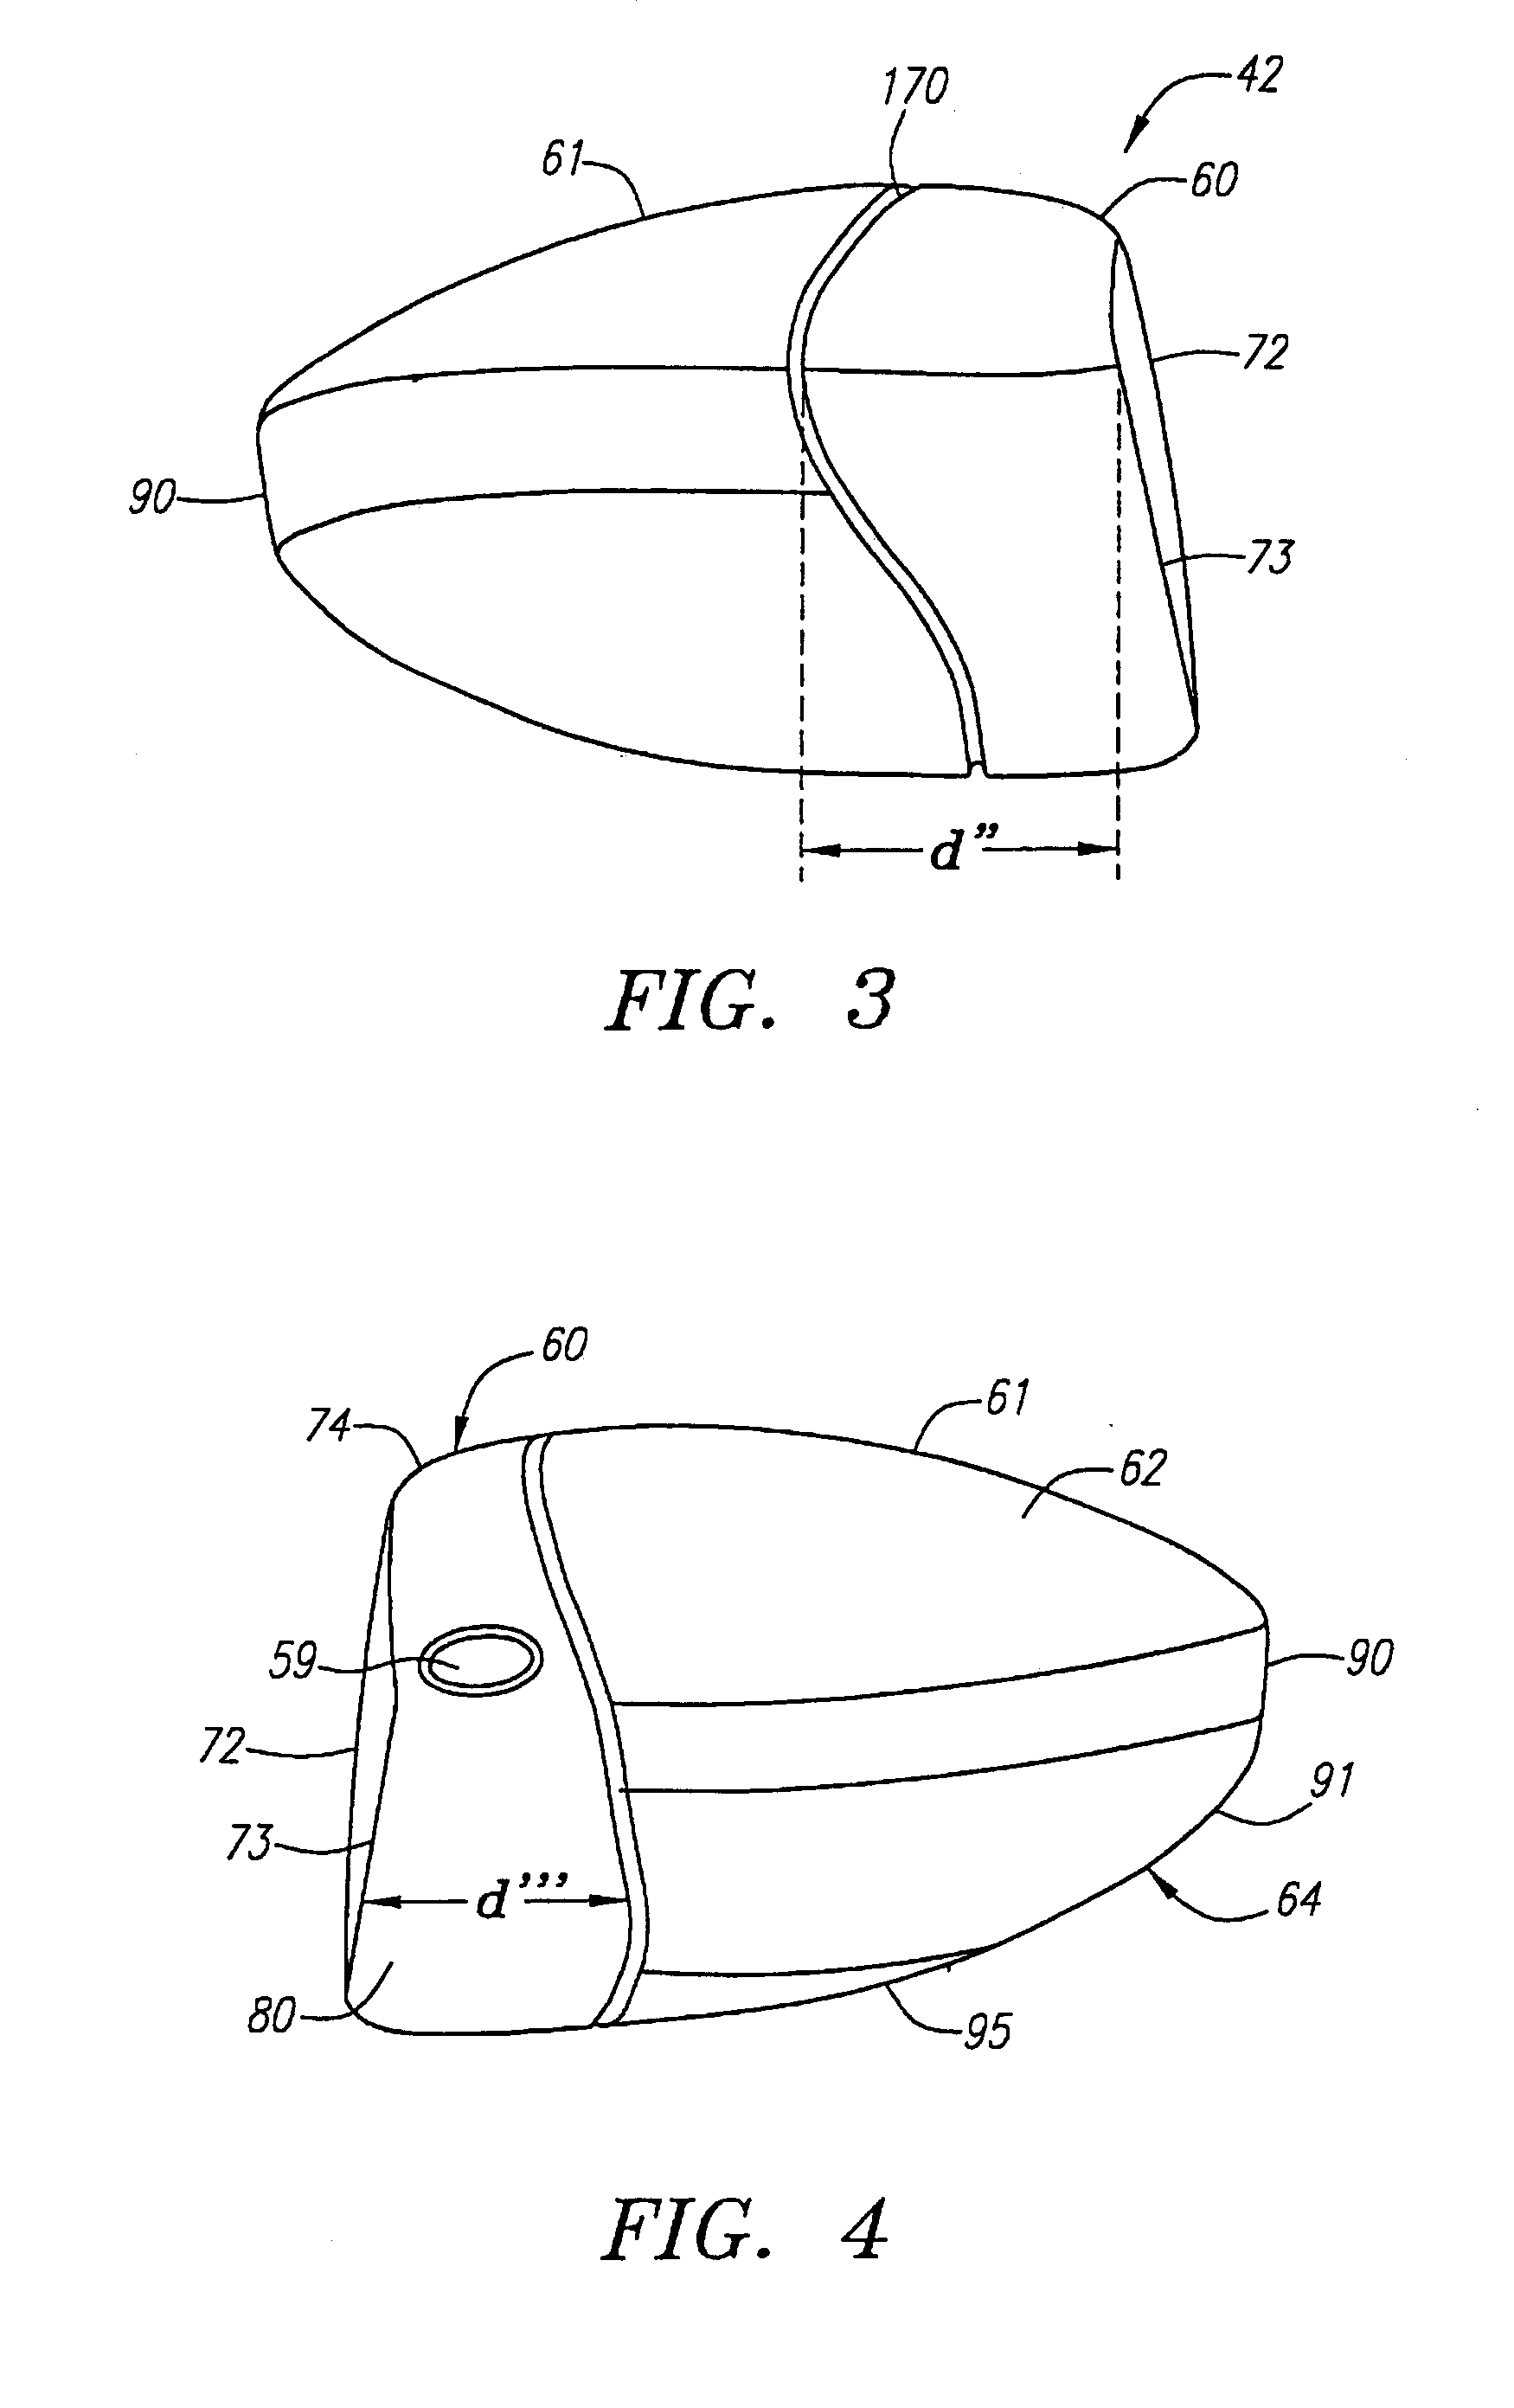 Bonded joint design for a golf club head